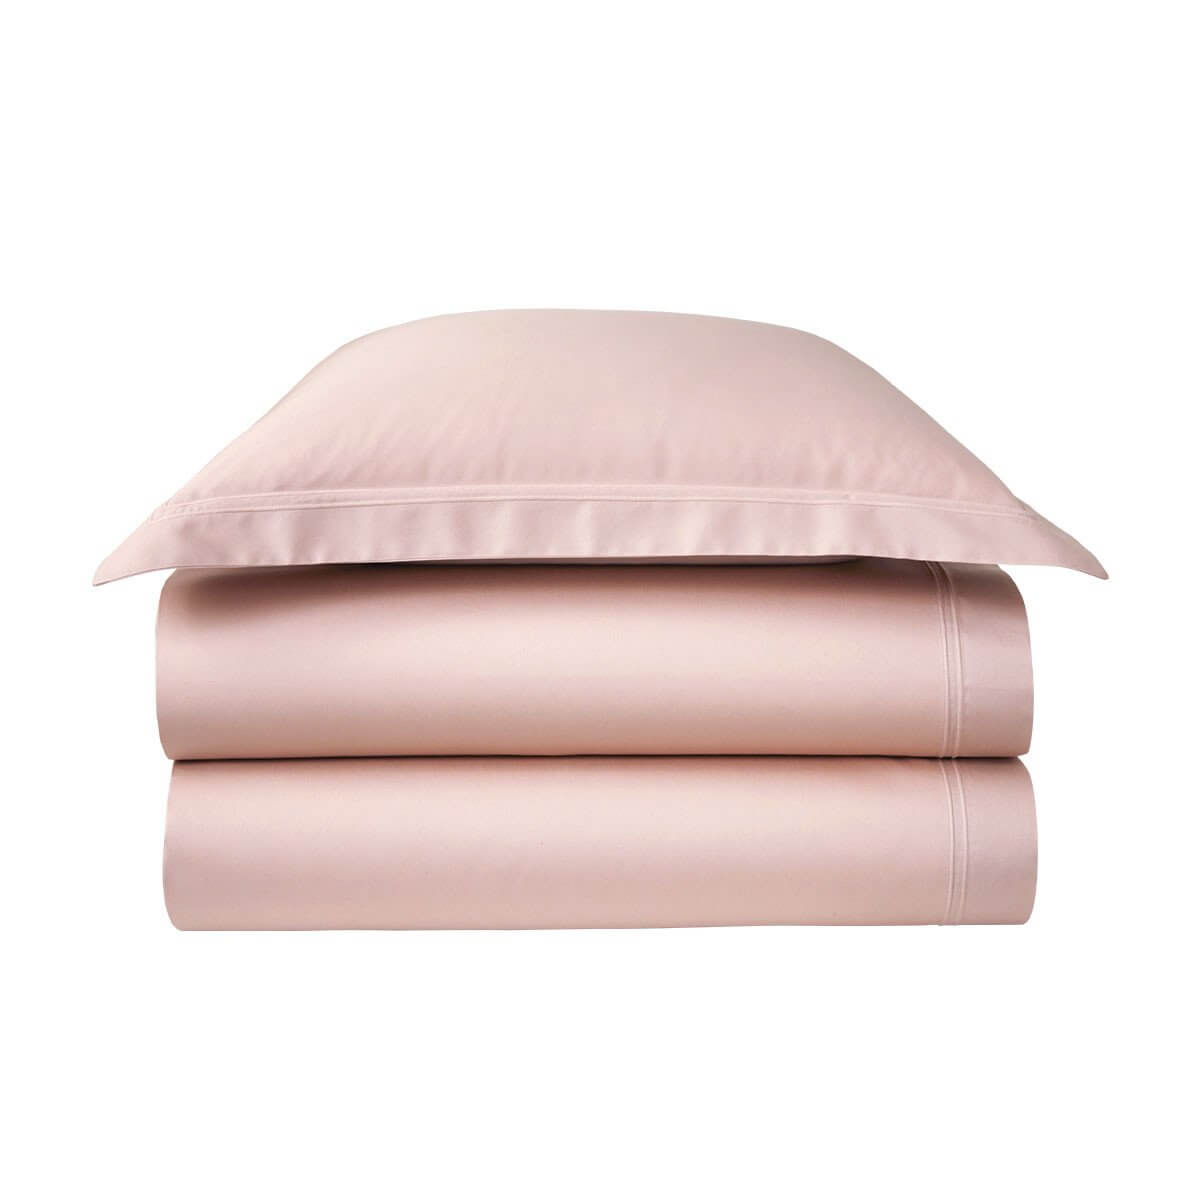 Yves Delorme Triomphe Sheets and Pillowcases